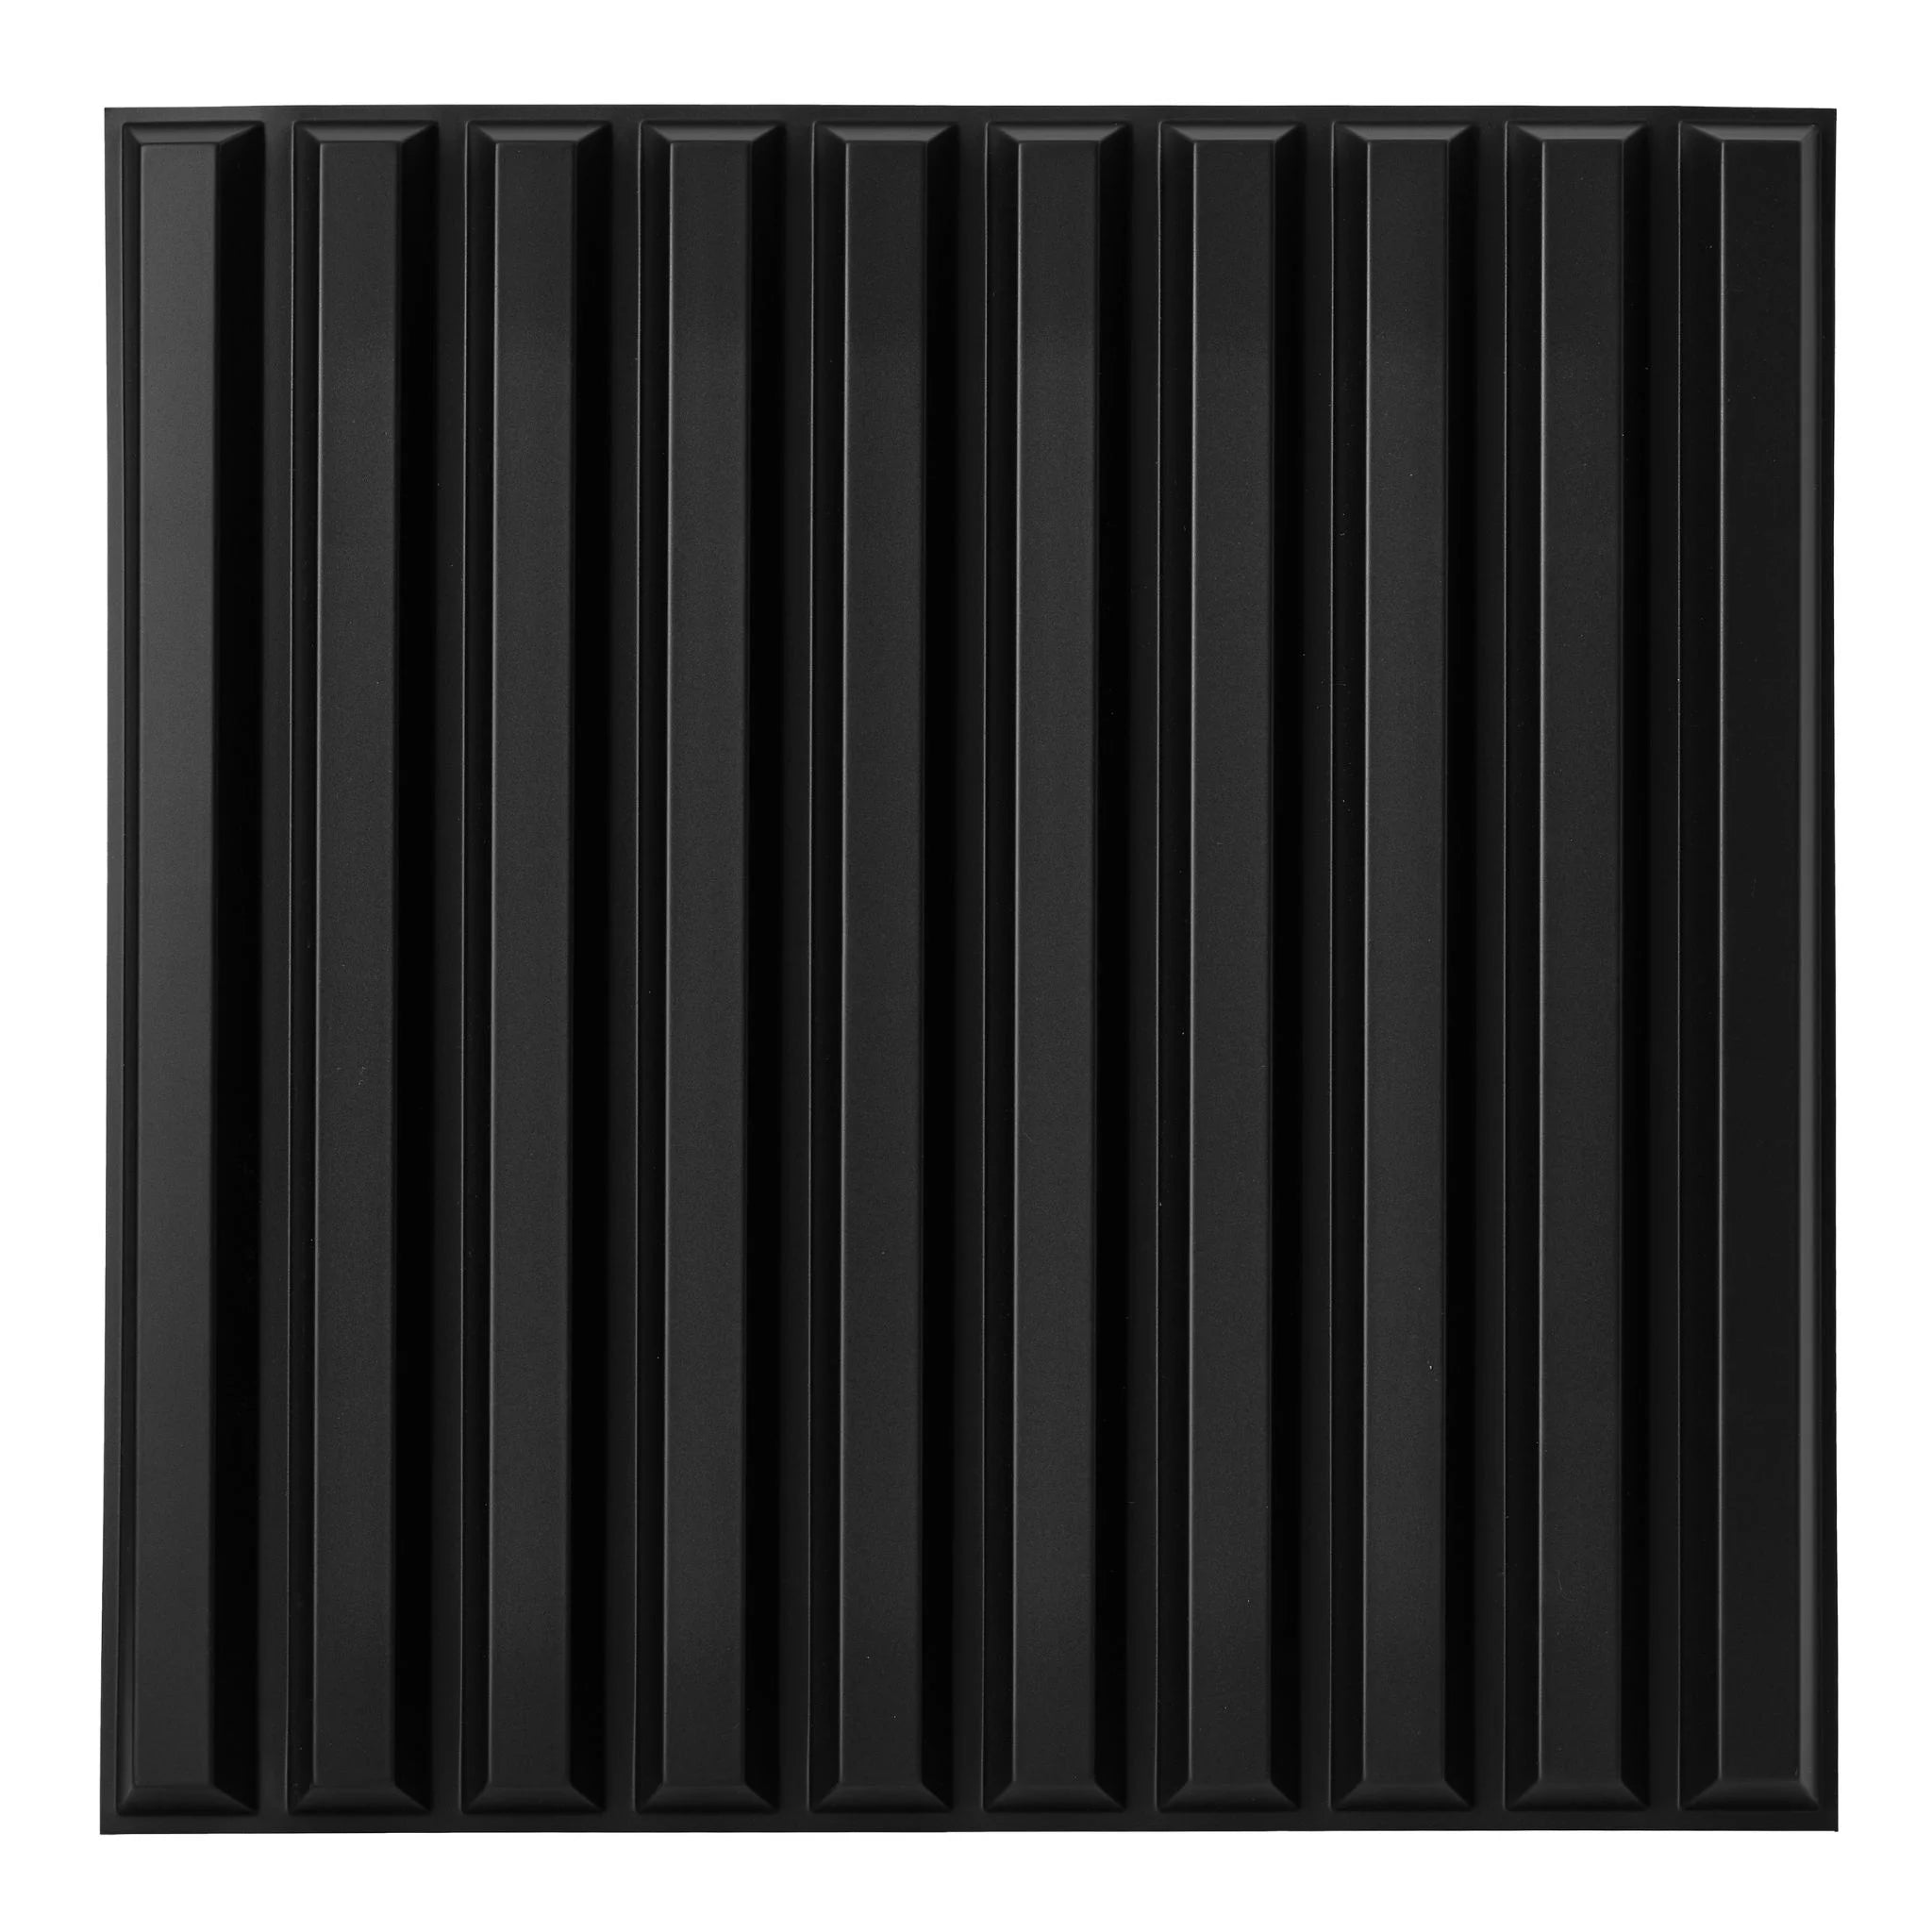 Black PVC wall panel with vertical ribbed design